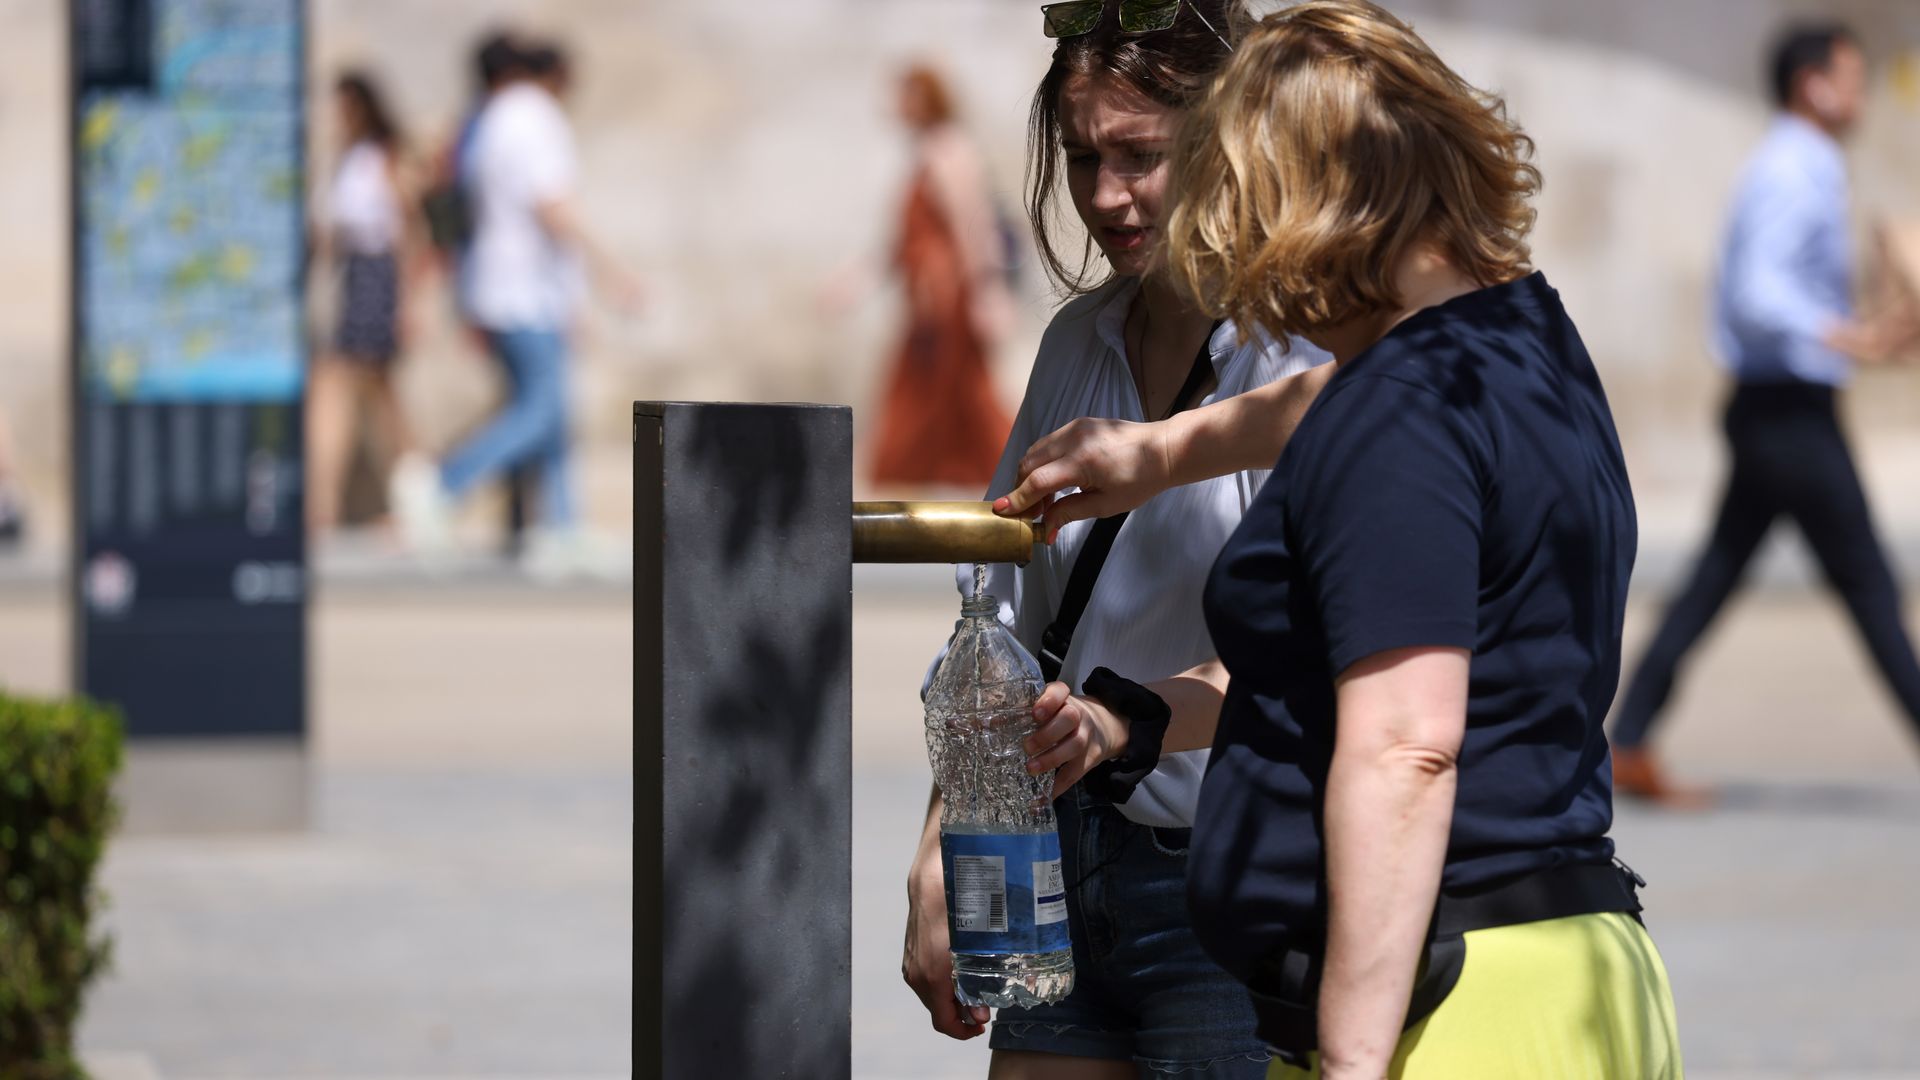 Pedestrians fill up a water bottle in June of this year as tepertarues reach 34 degrees Celsius (93.2 degrees Fahrenheit)